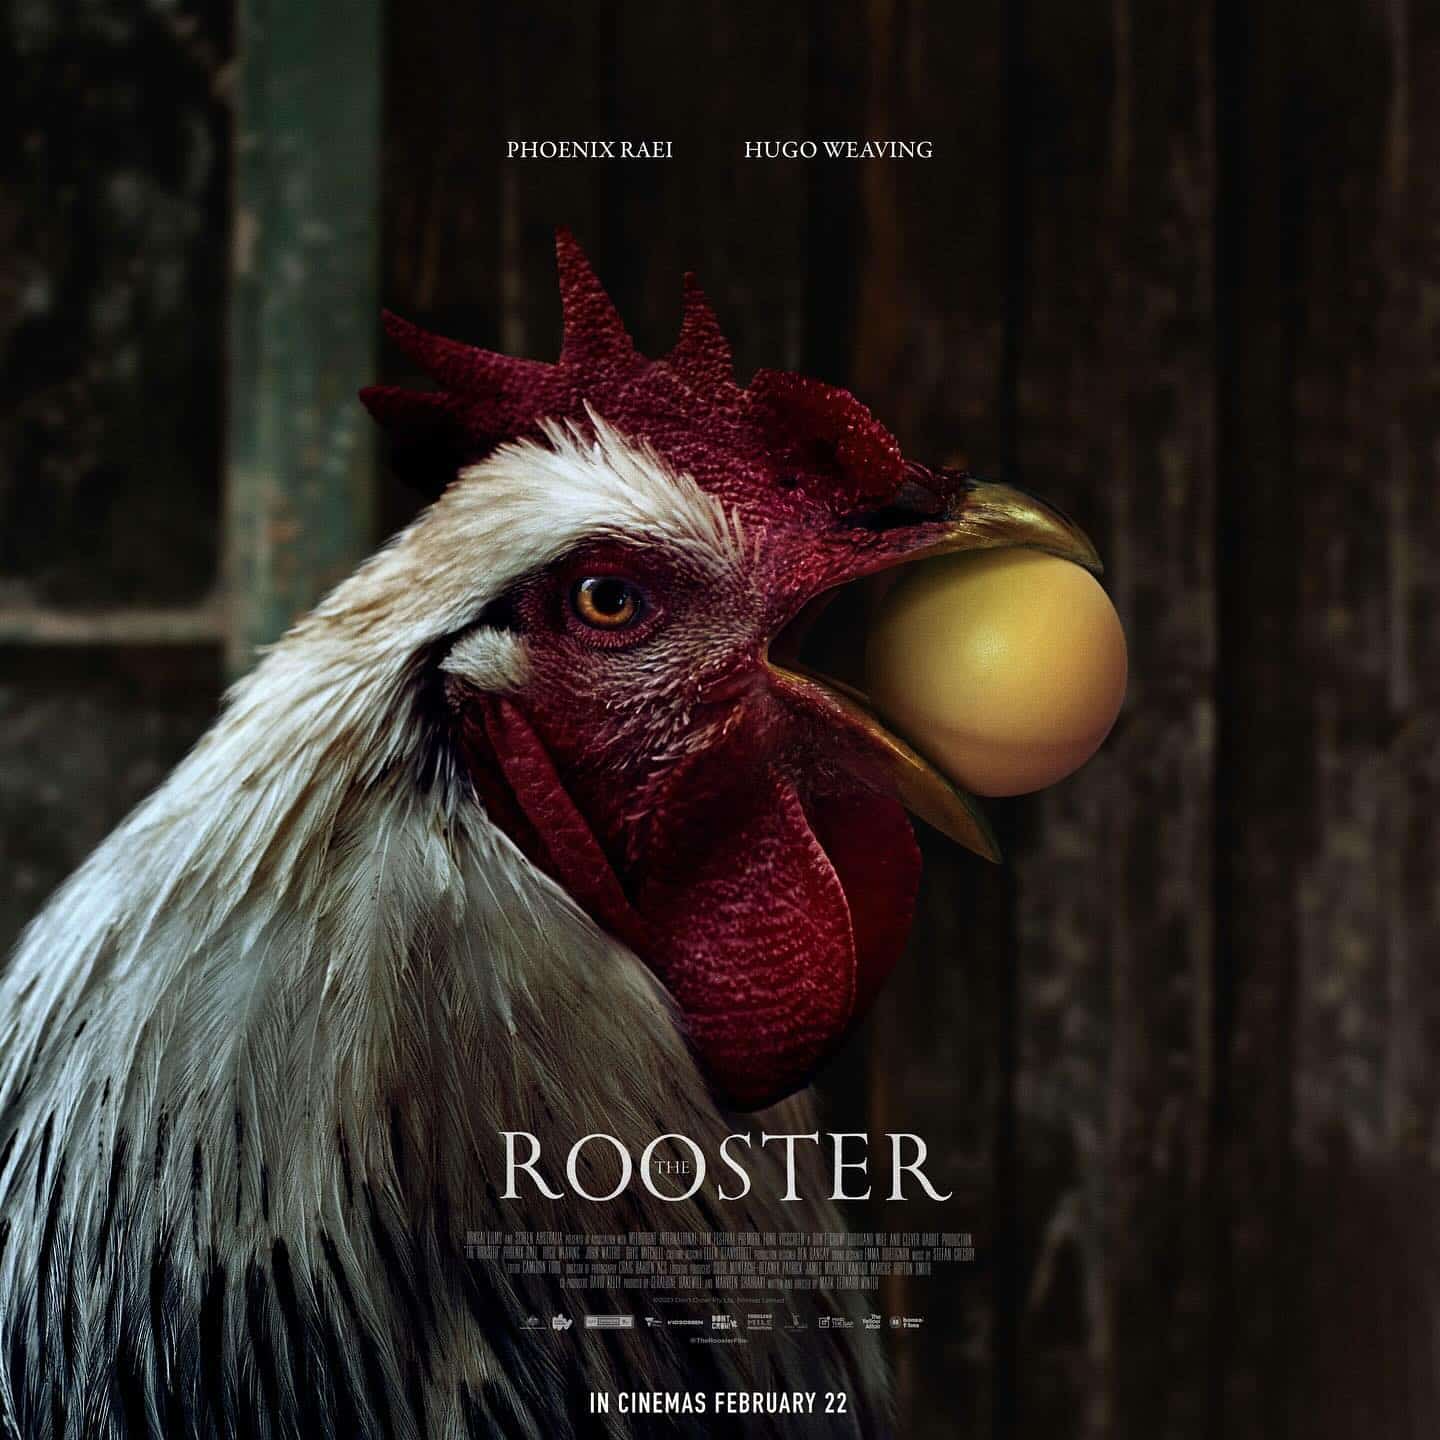 The Rooster Film Review